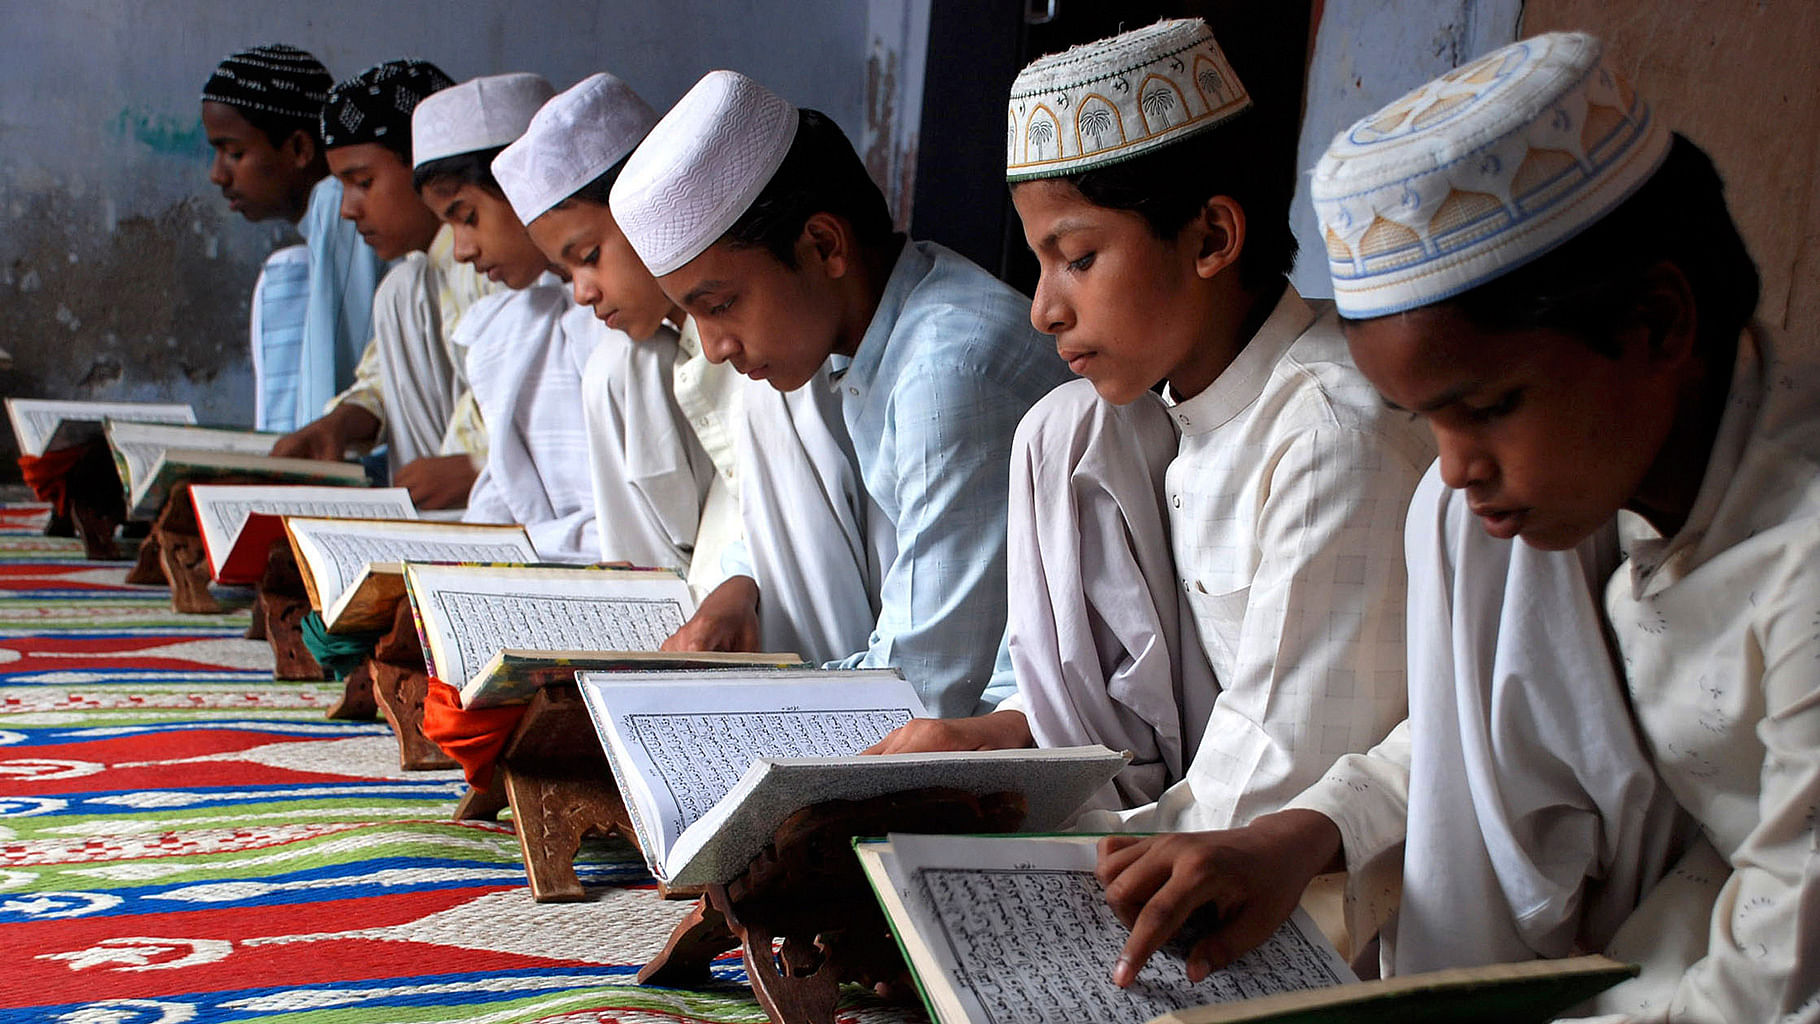 In Maharashtra, there are 1,889 madrassas of which 550 teach modern subjects.